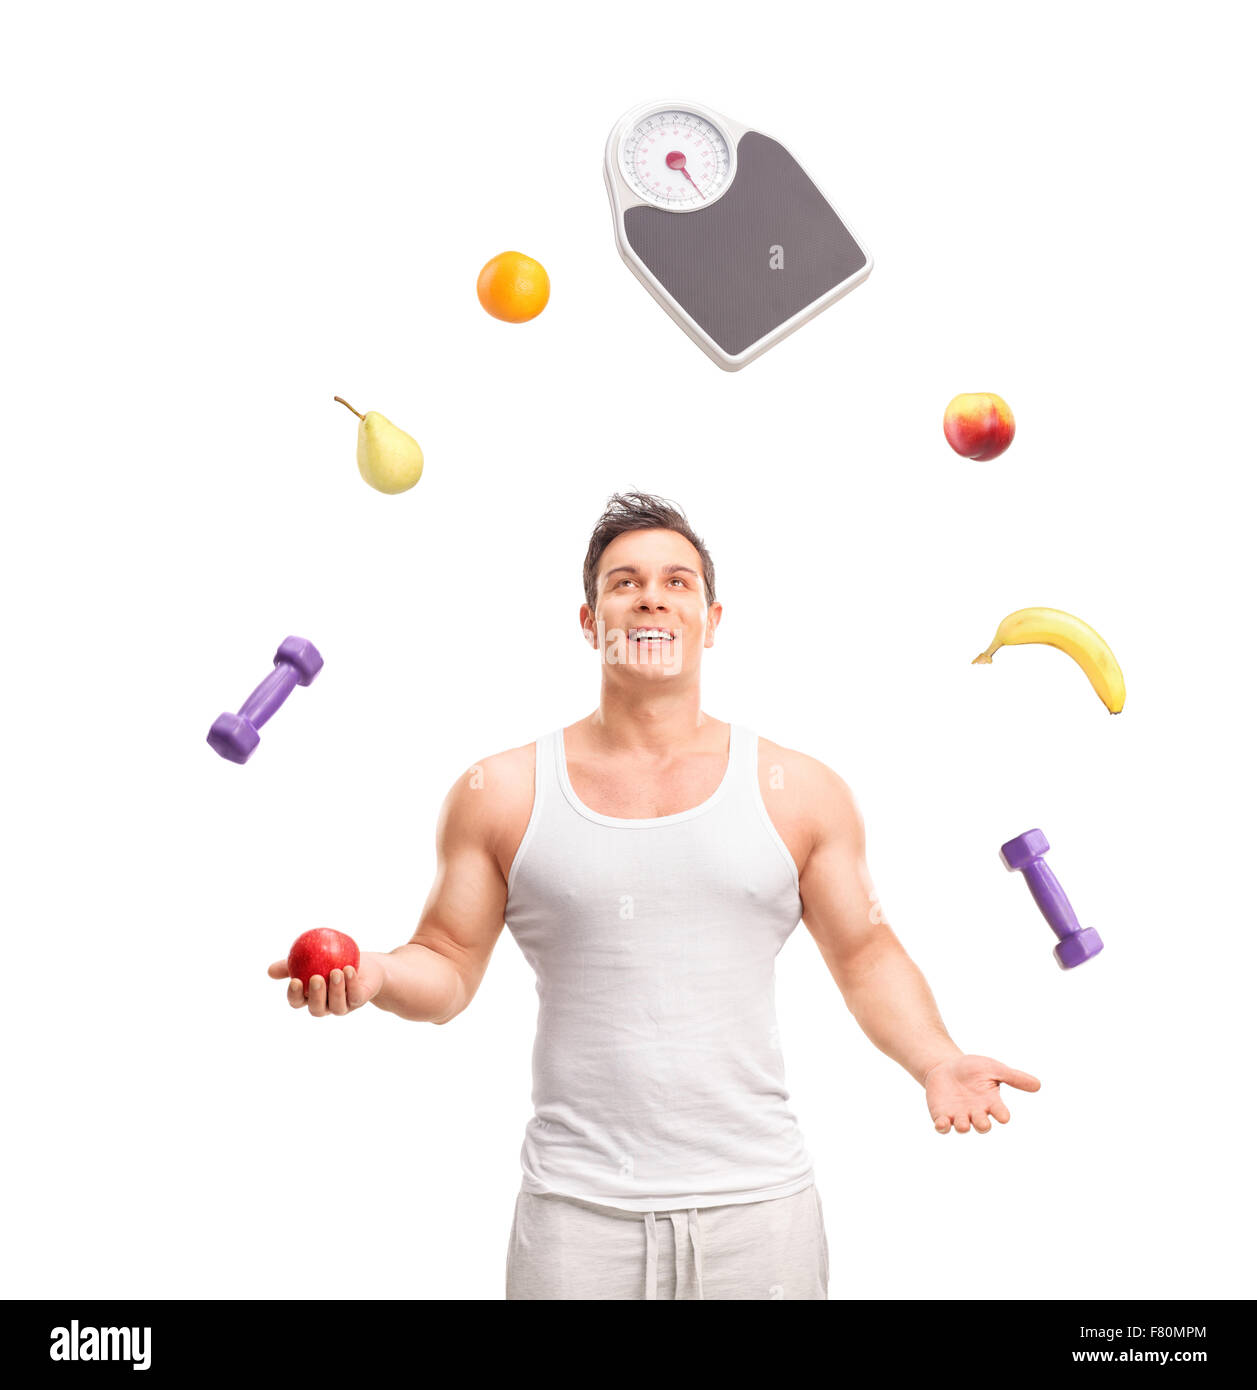 Handsome young guy juggling with several fruits and a weight scale isolated on white background Stock Photo